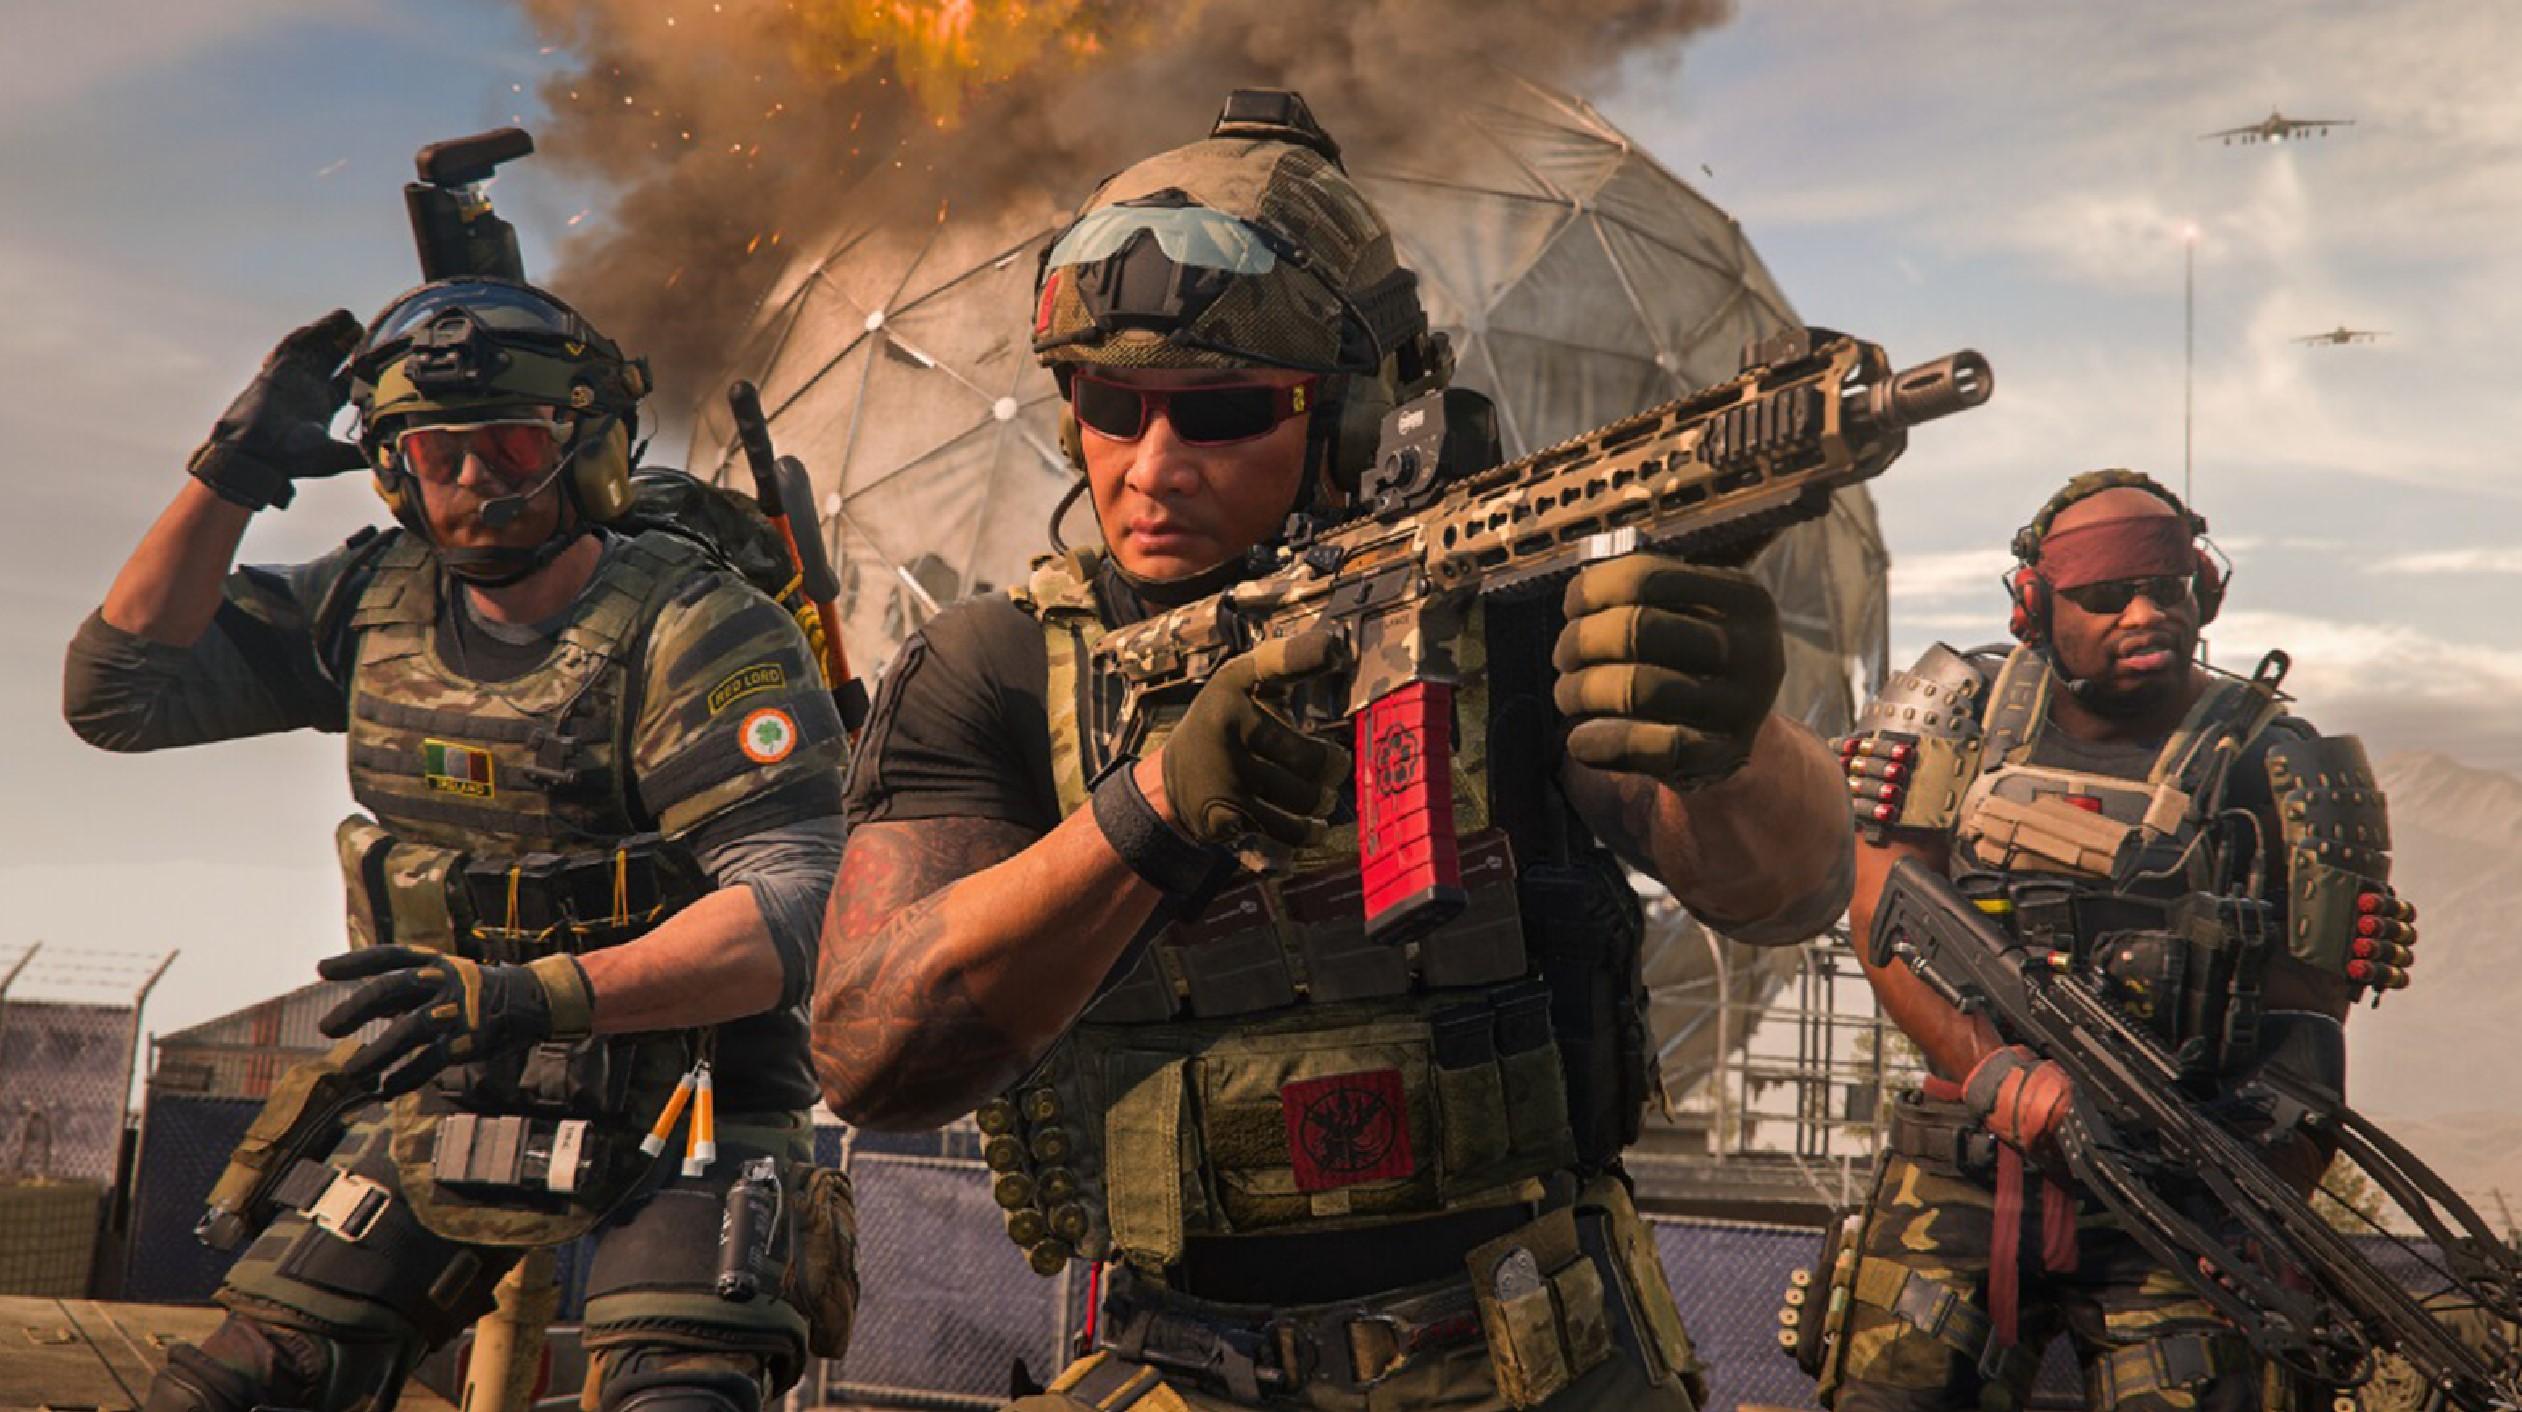 Activision pulling plug on original Call of Duty: Warzone this September